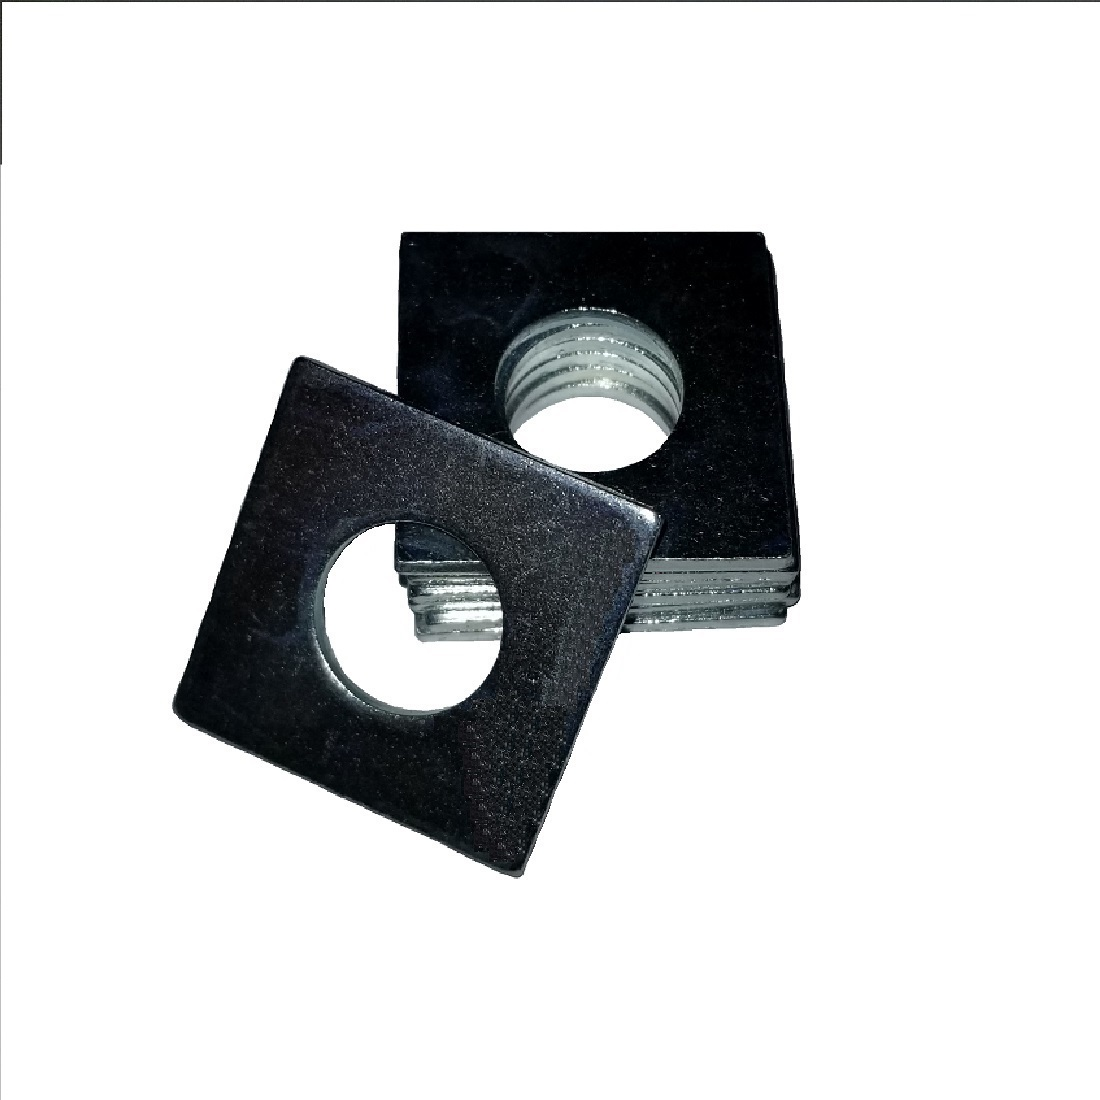 Square OD Washer - 0.875 ID, 2.000 OD, 0.250 Thick, Low Carbon Steel - Soft